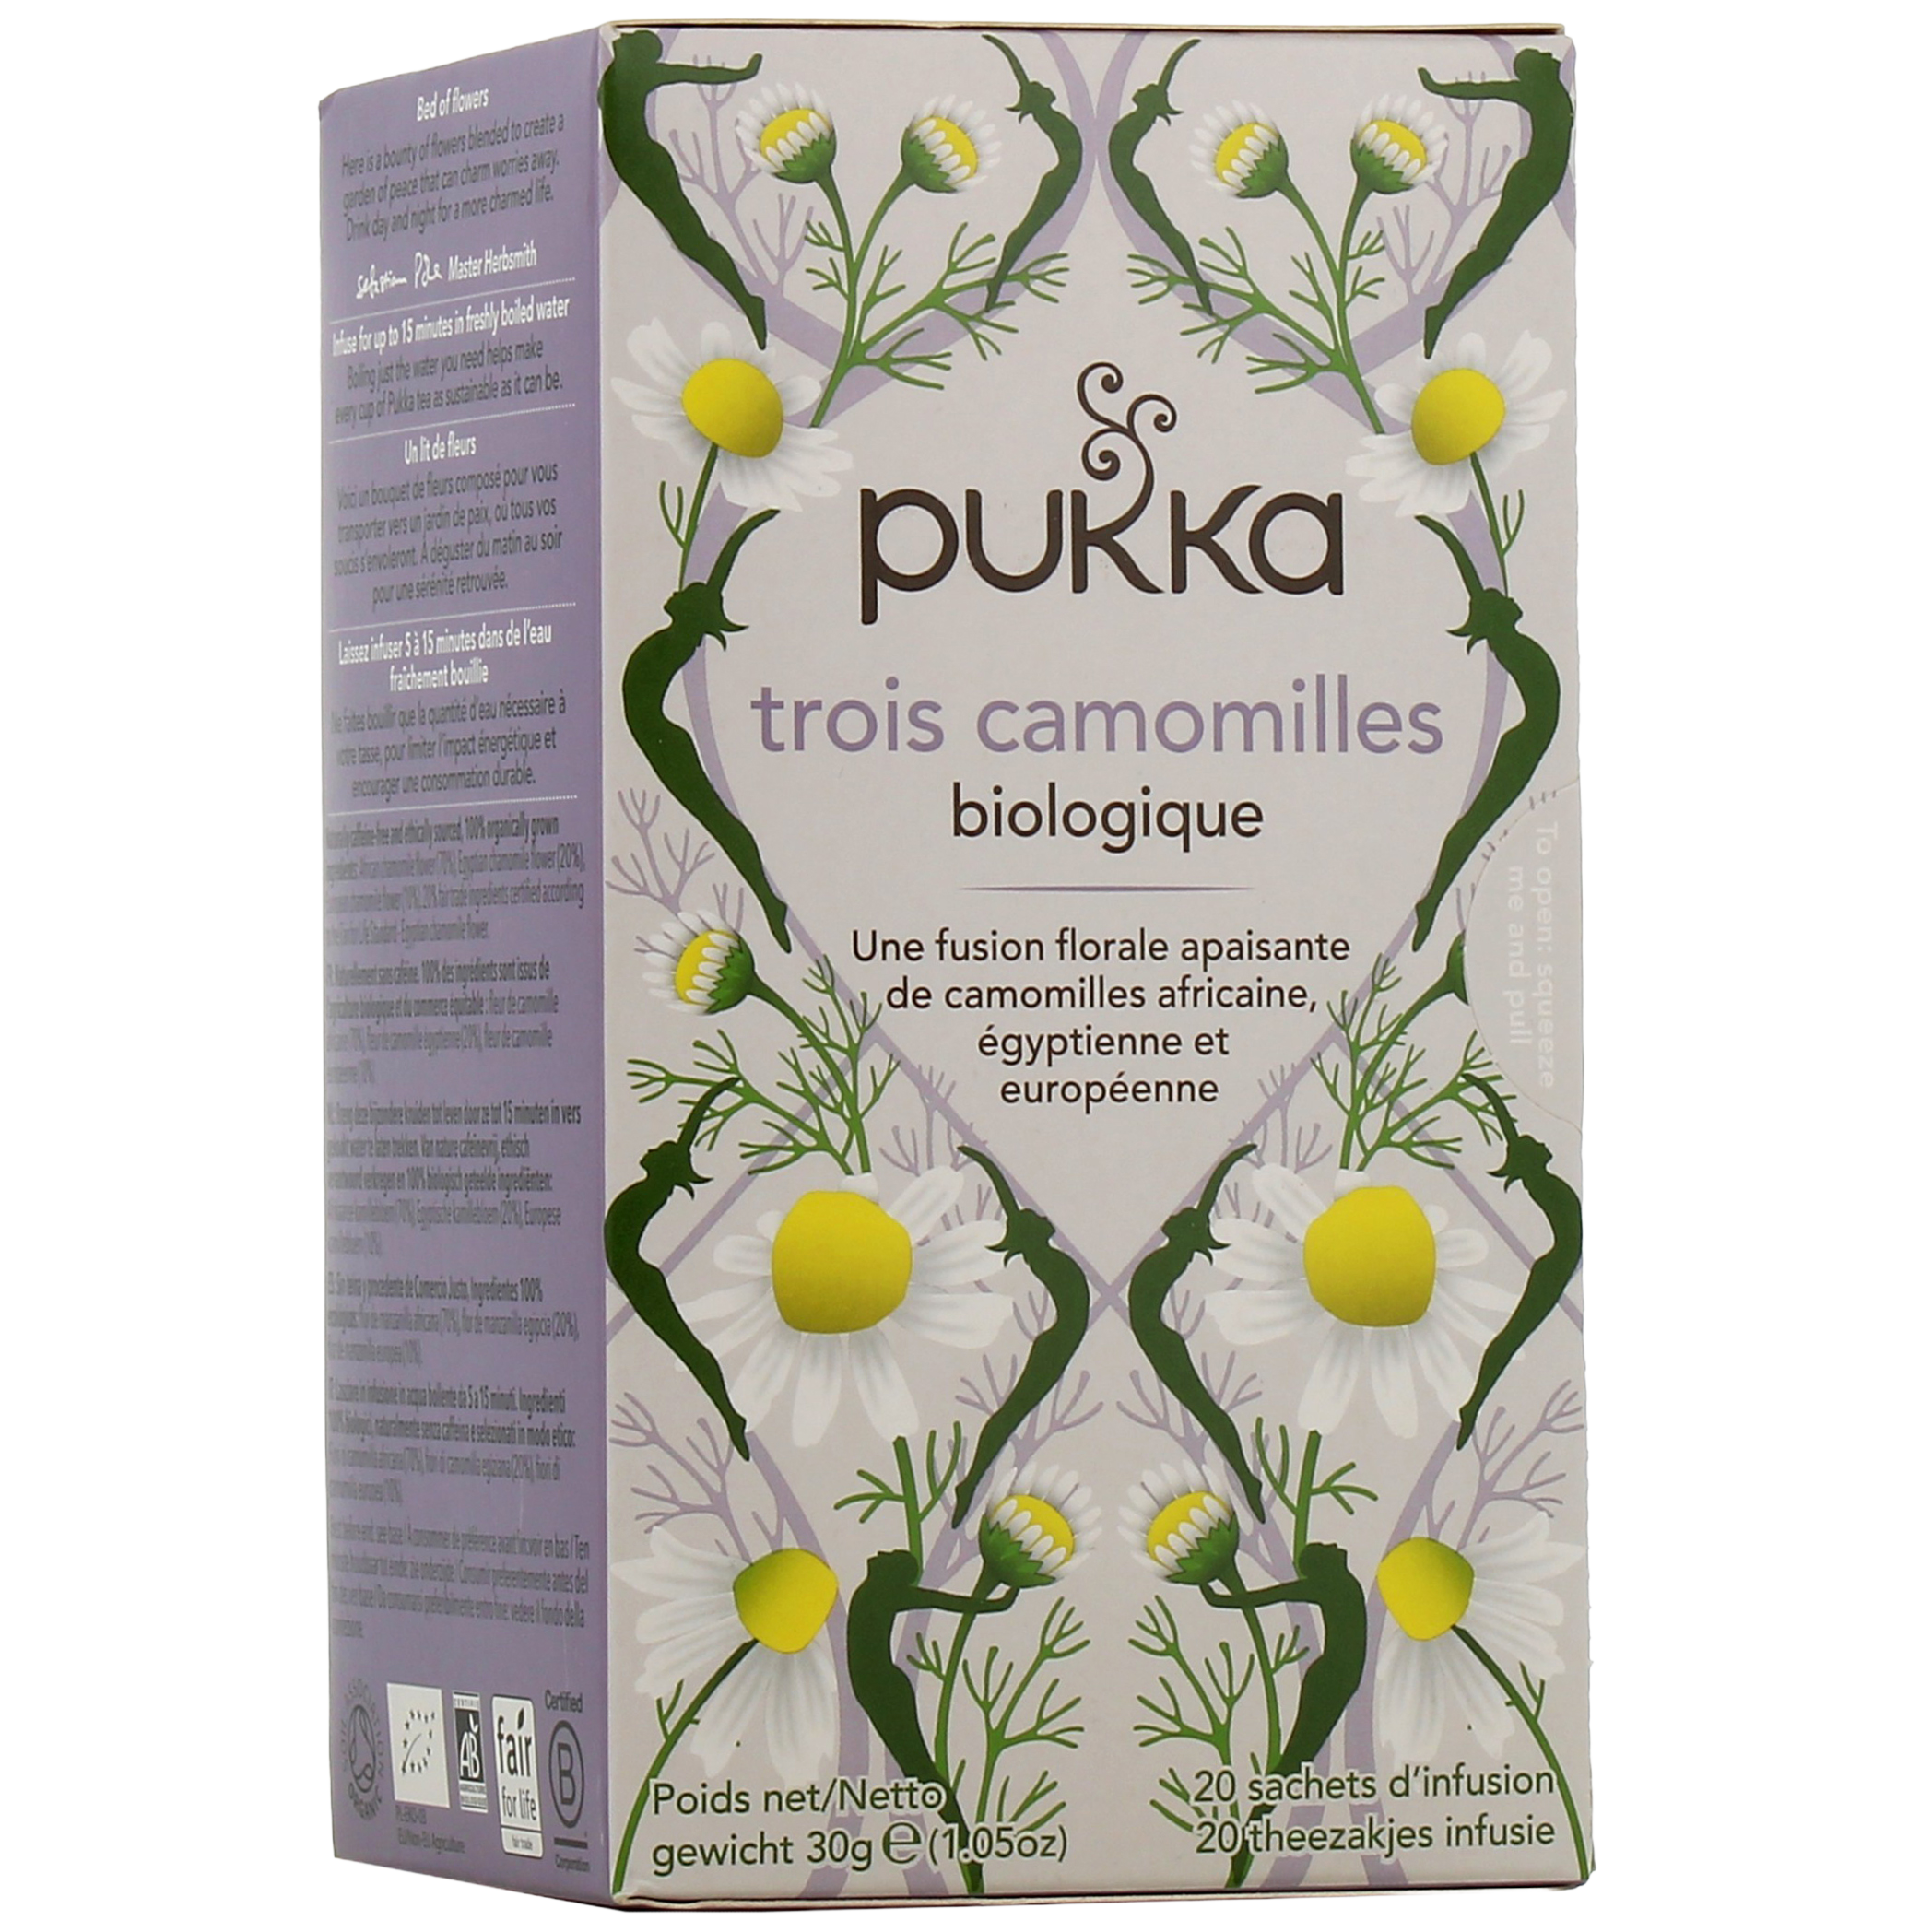 Infusion Nuit Paisible - Thé Pukka